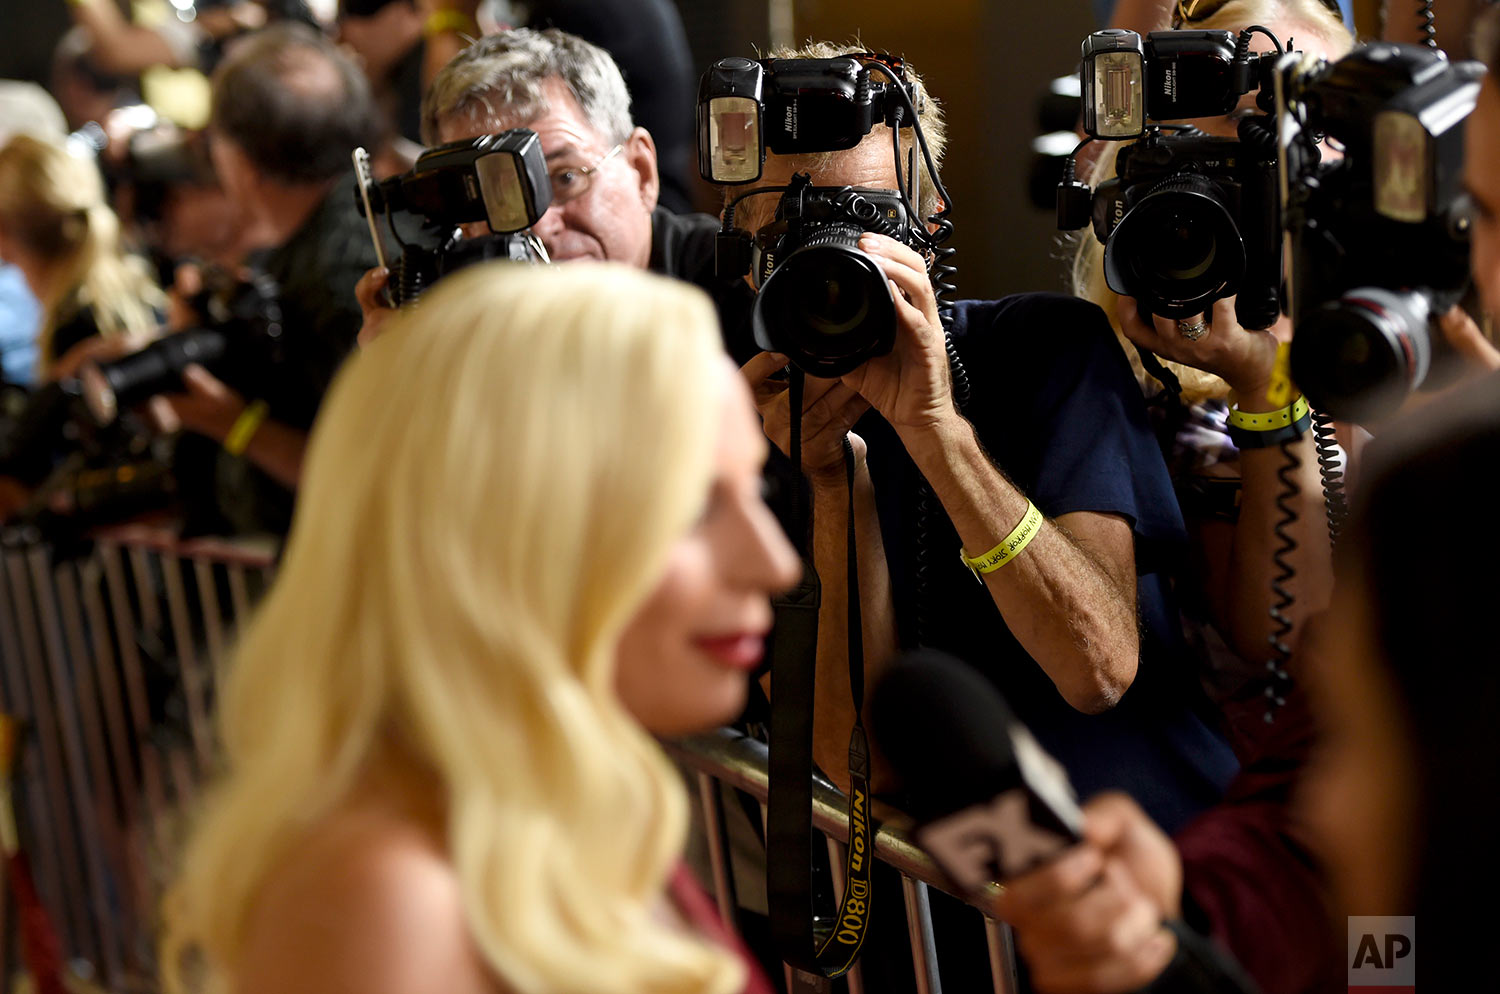  Lady Gaga participates in an interview as she arrives at the Los Angeles premiere screening of "American Horror Story: Hotel" at Regal Cinemas L.A. Live on Saturday, Oct. 3, 2015. (Photo by Chris Pizzello/Invision/AP) 